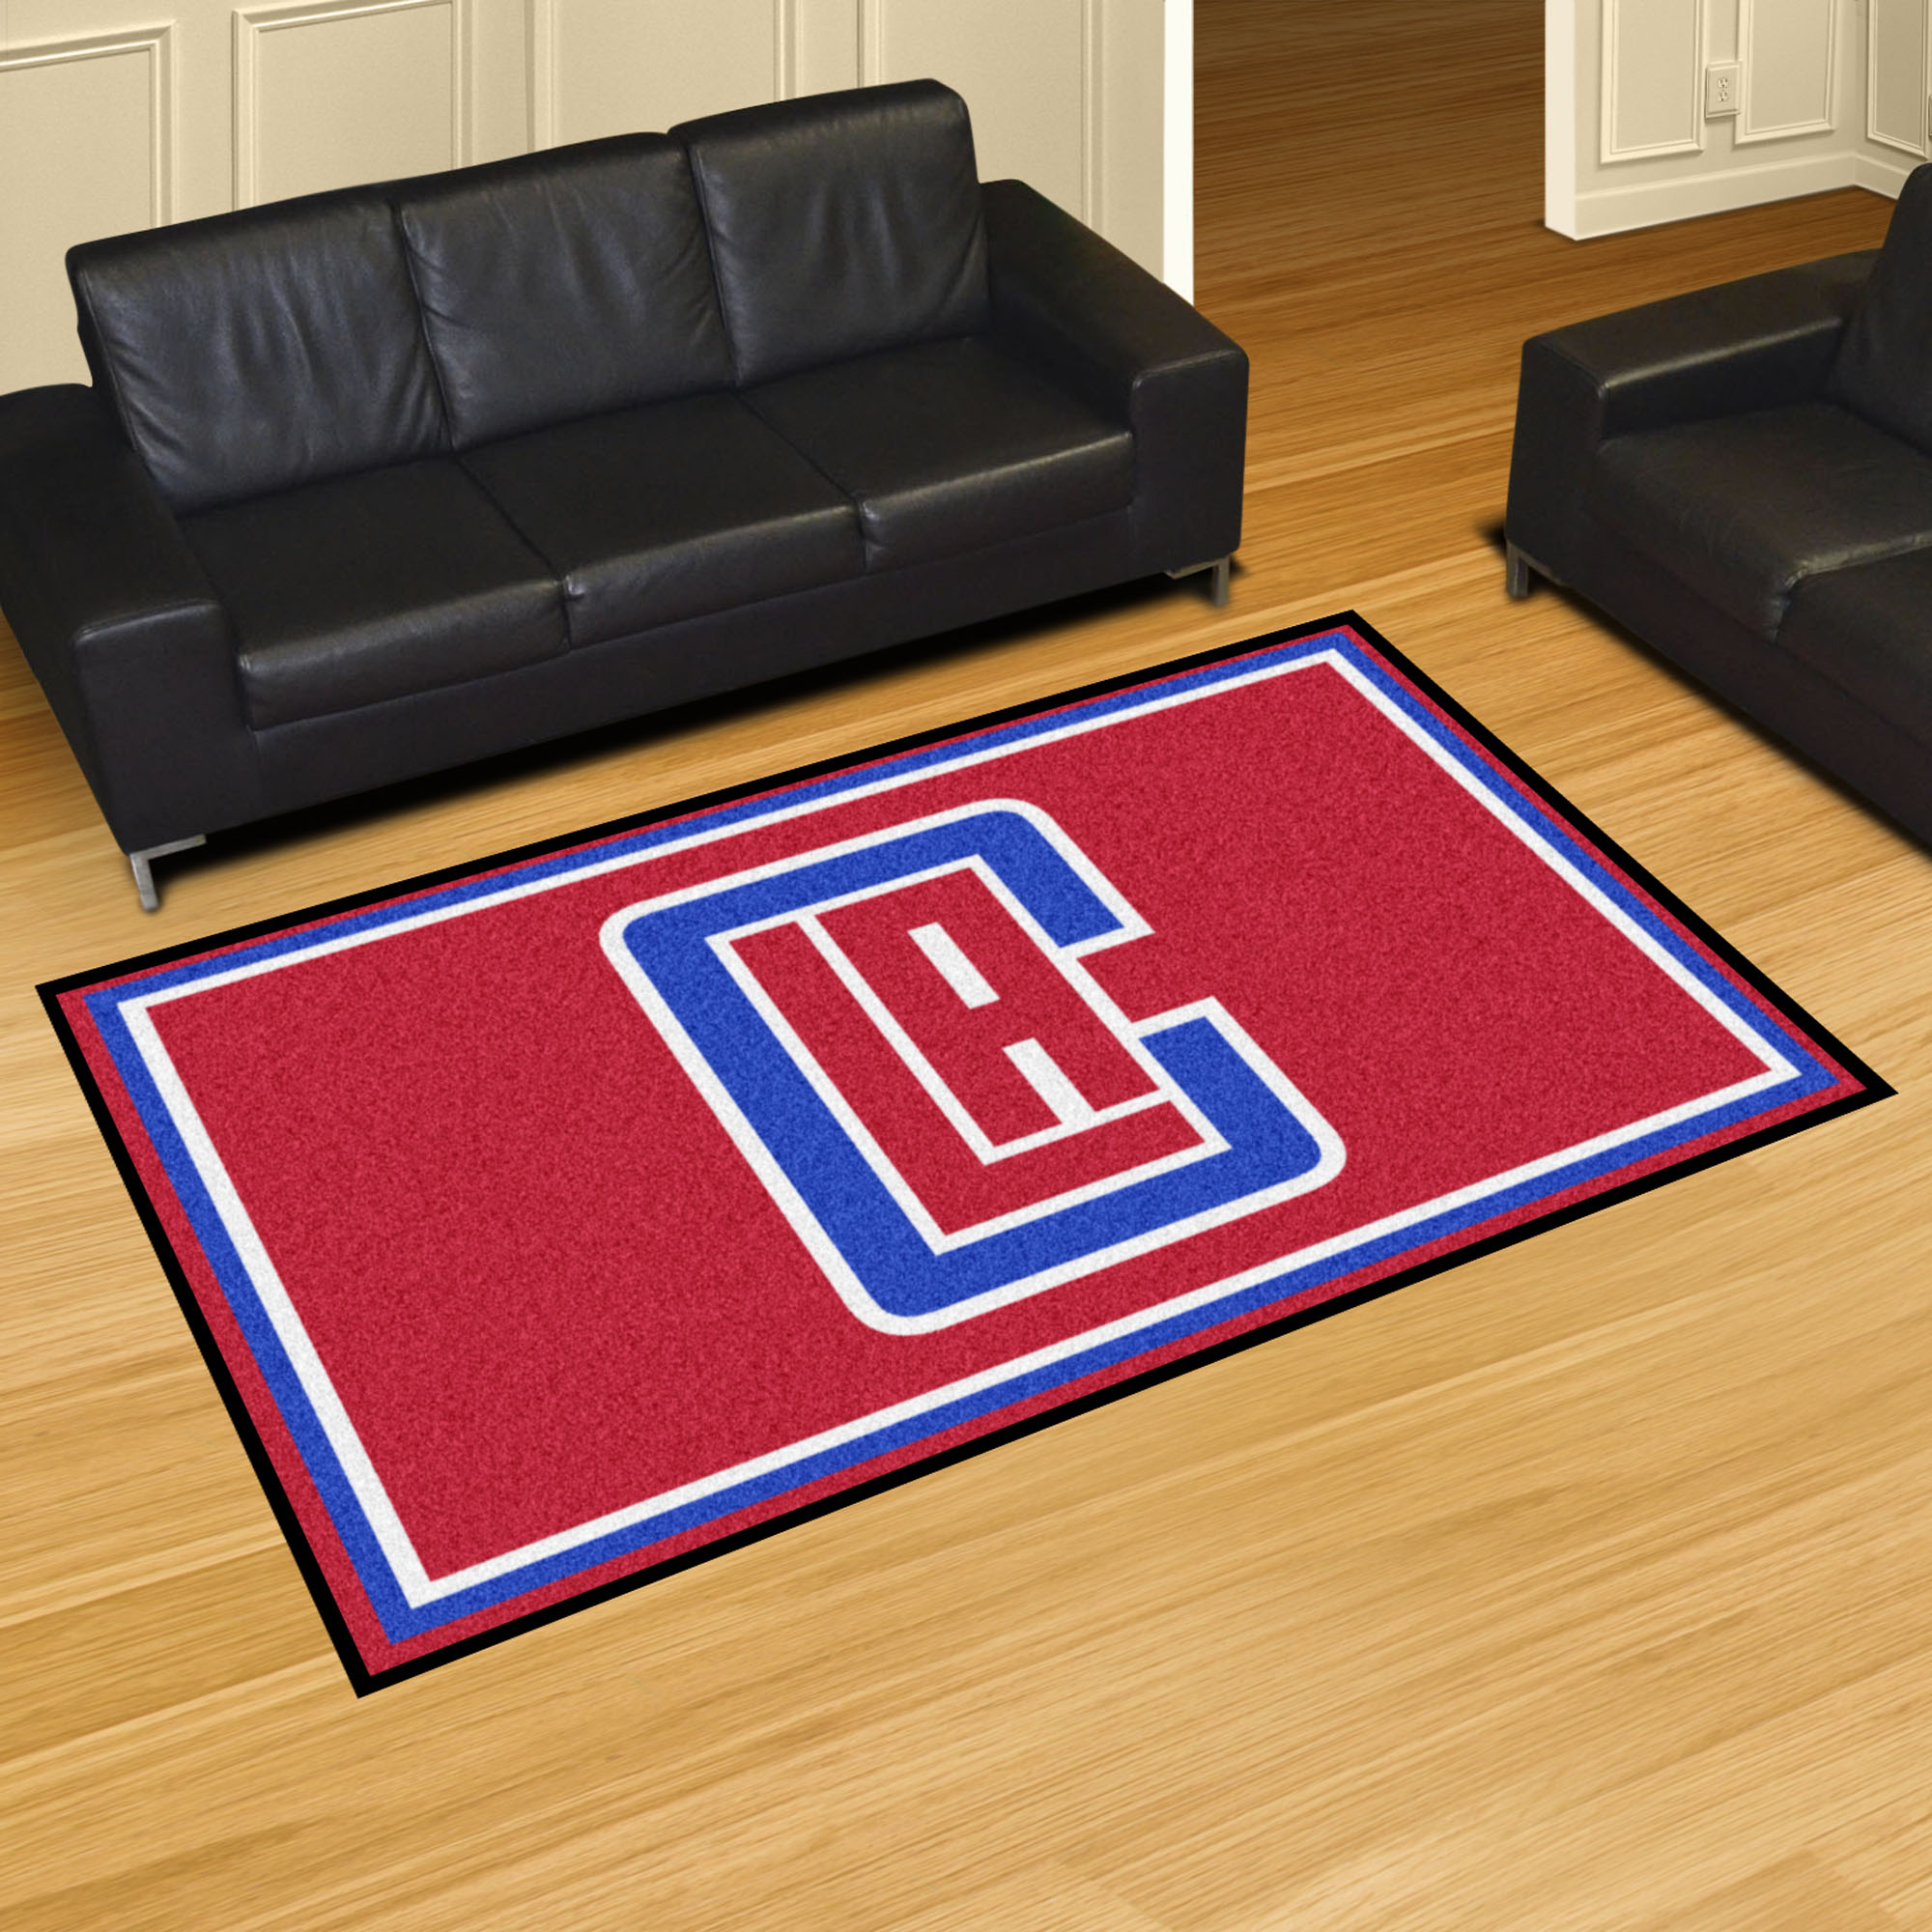 Los Angeles Clippers 5x8 Area Rug